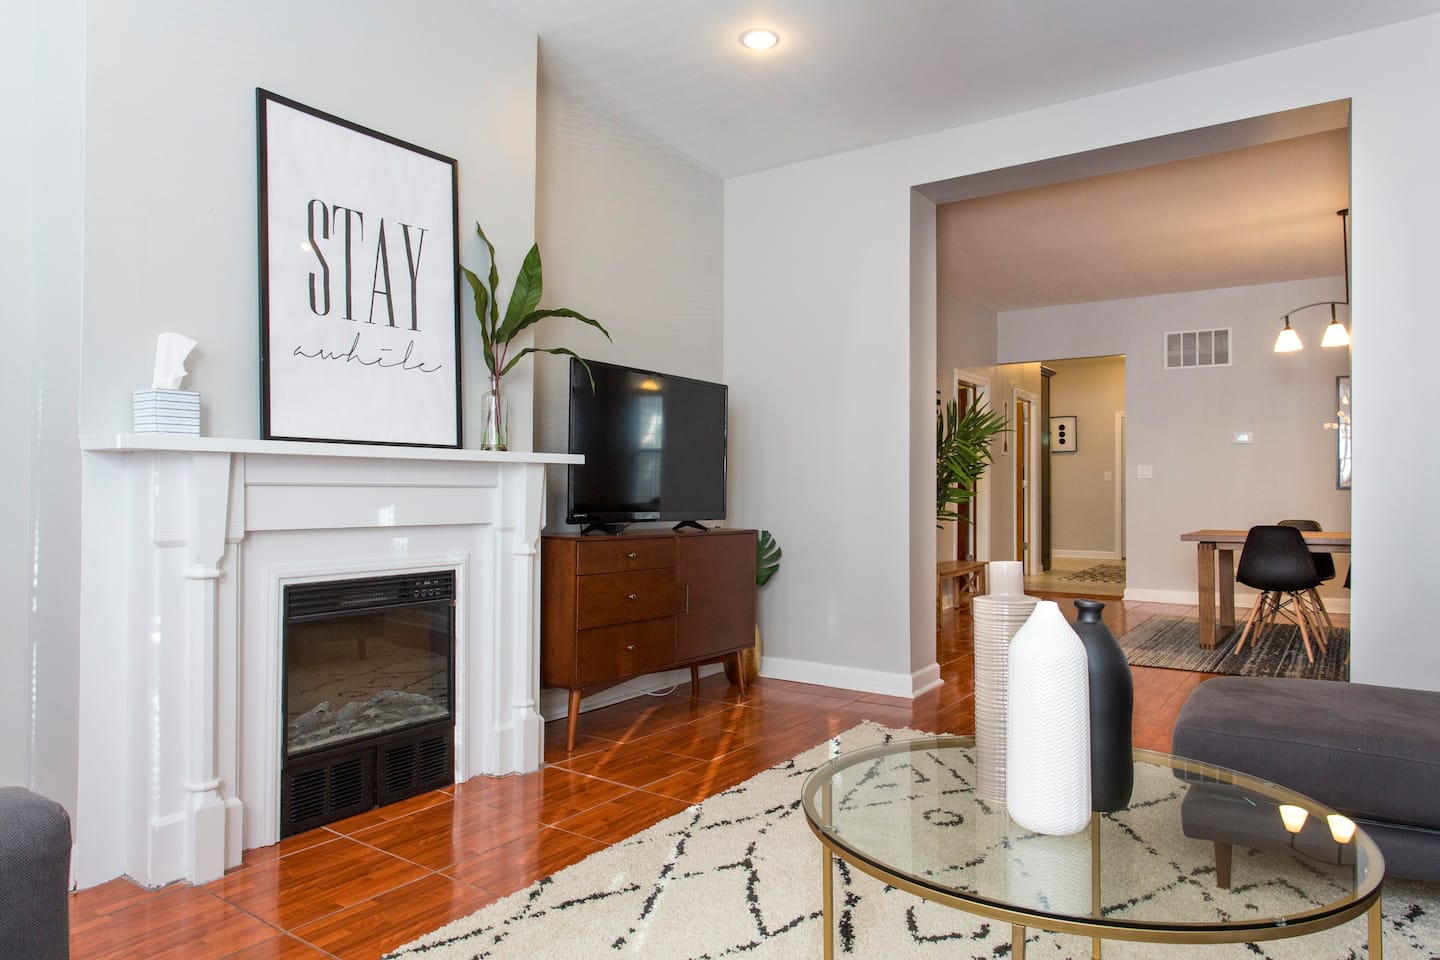 Hip and modern logan square apartment for a piece on the best Airbnbs in Chicago